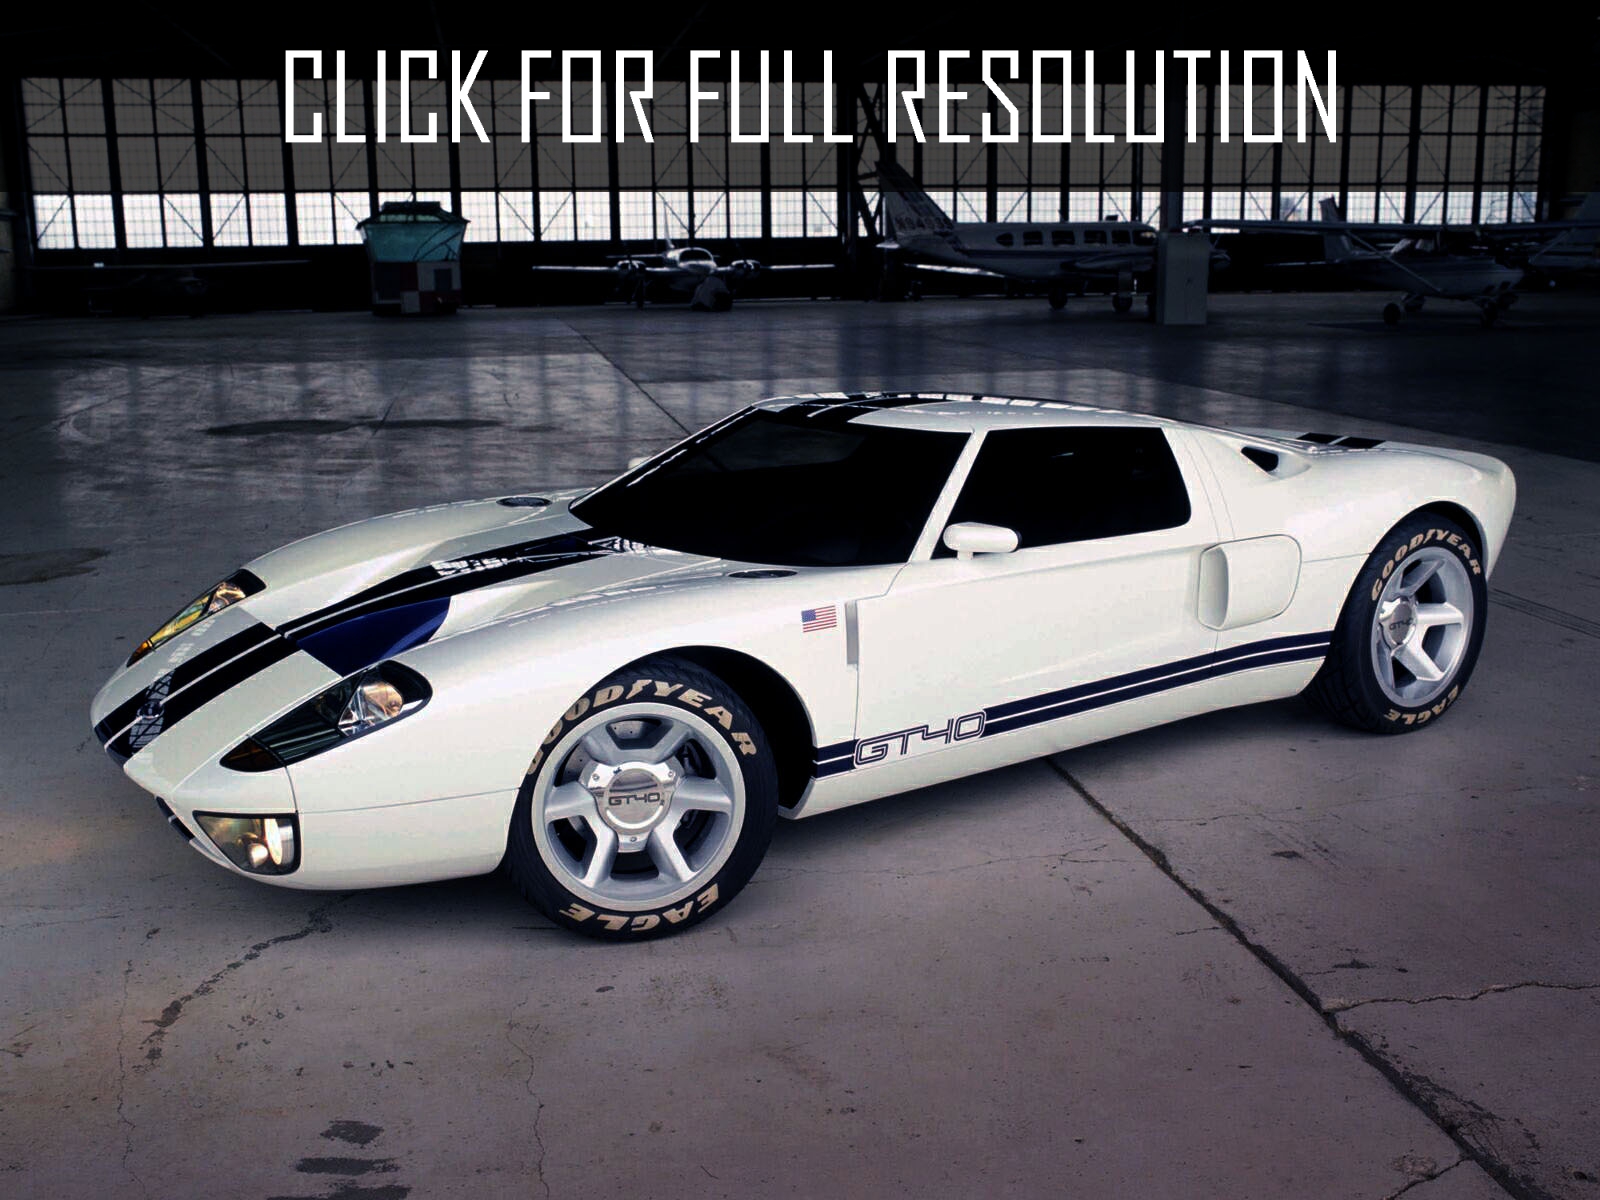 Ford GT White